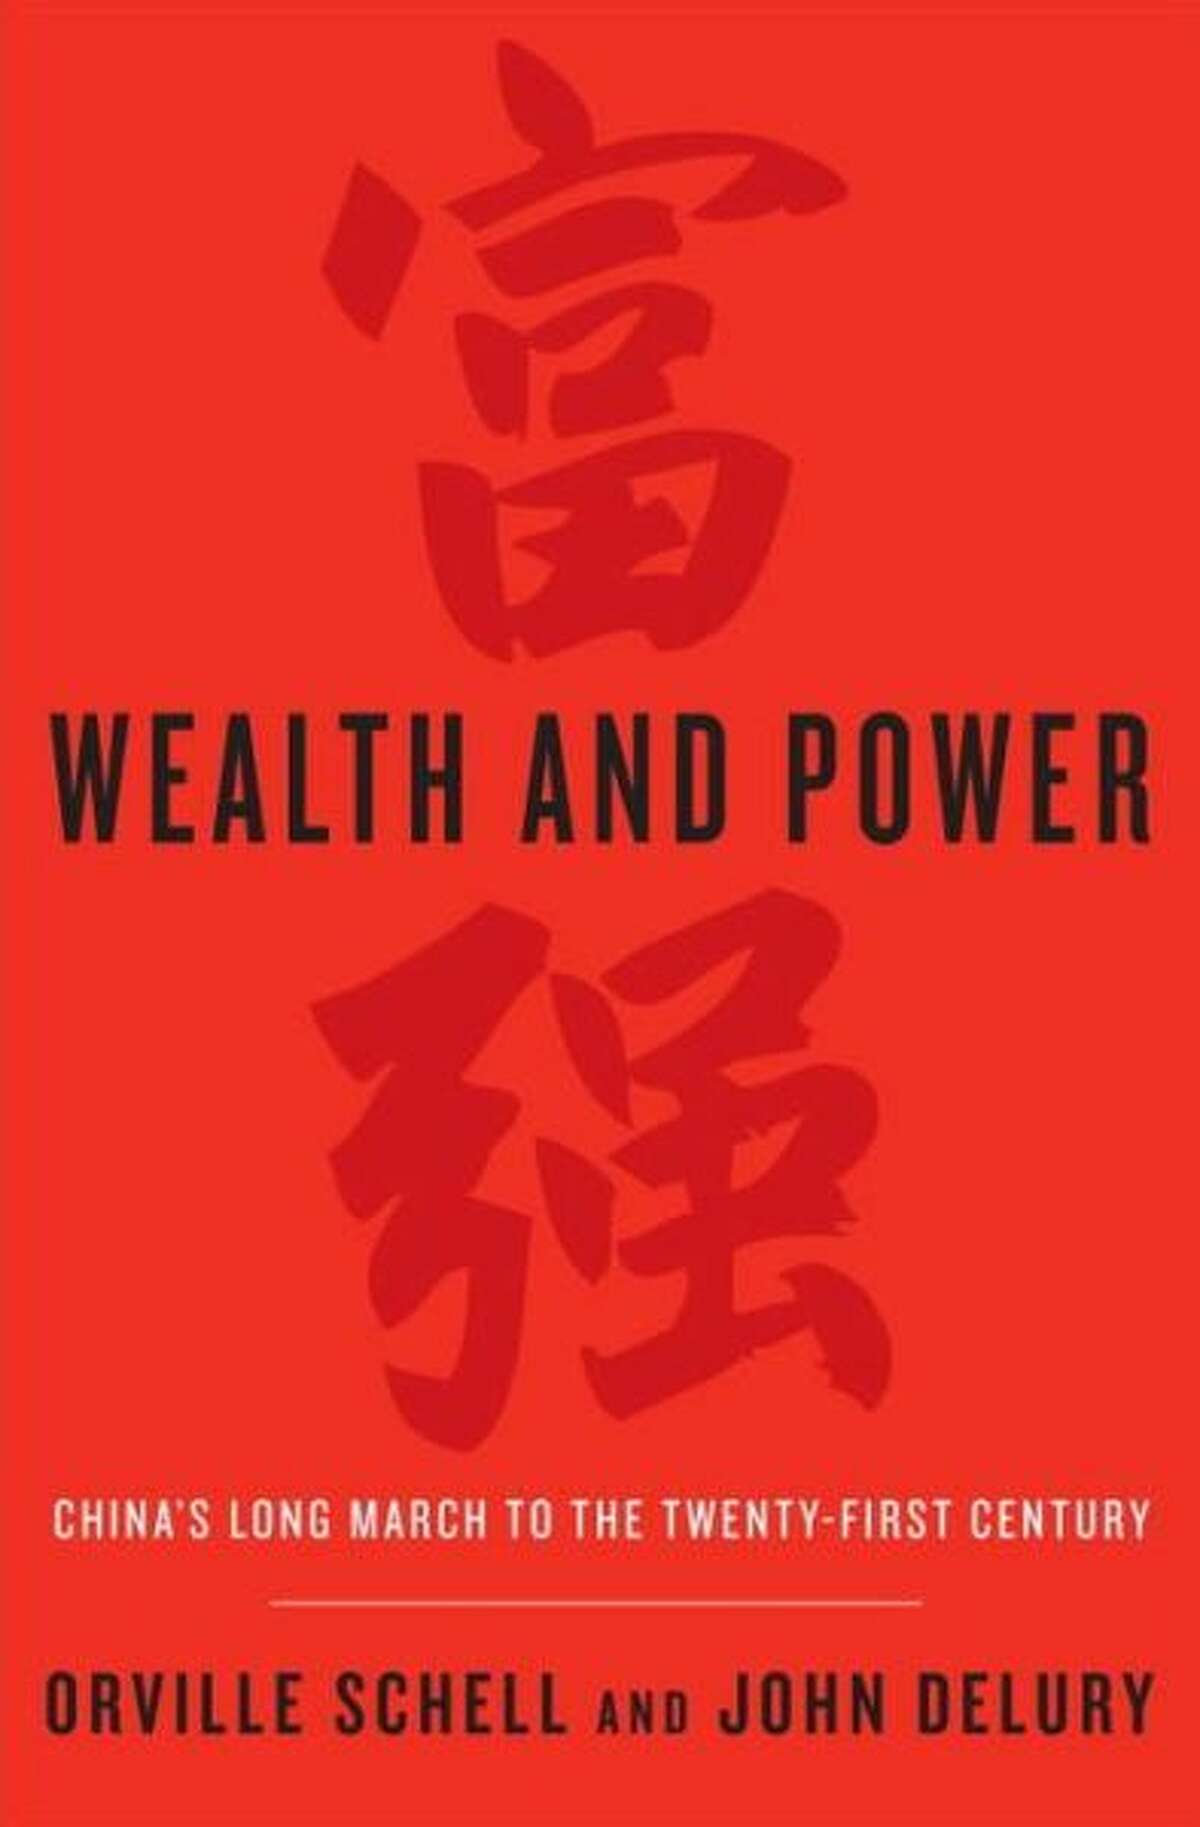 "Wealth and Power," co-authored by Orville Schell.